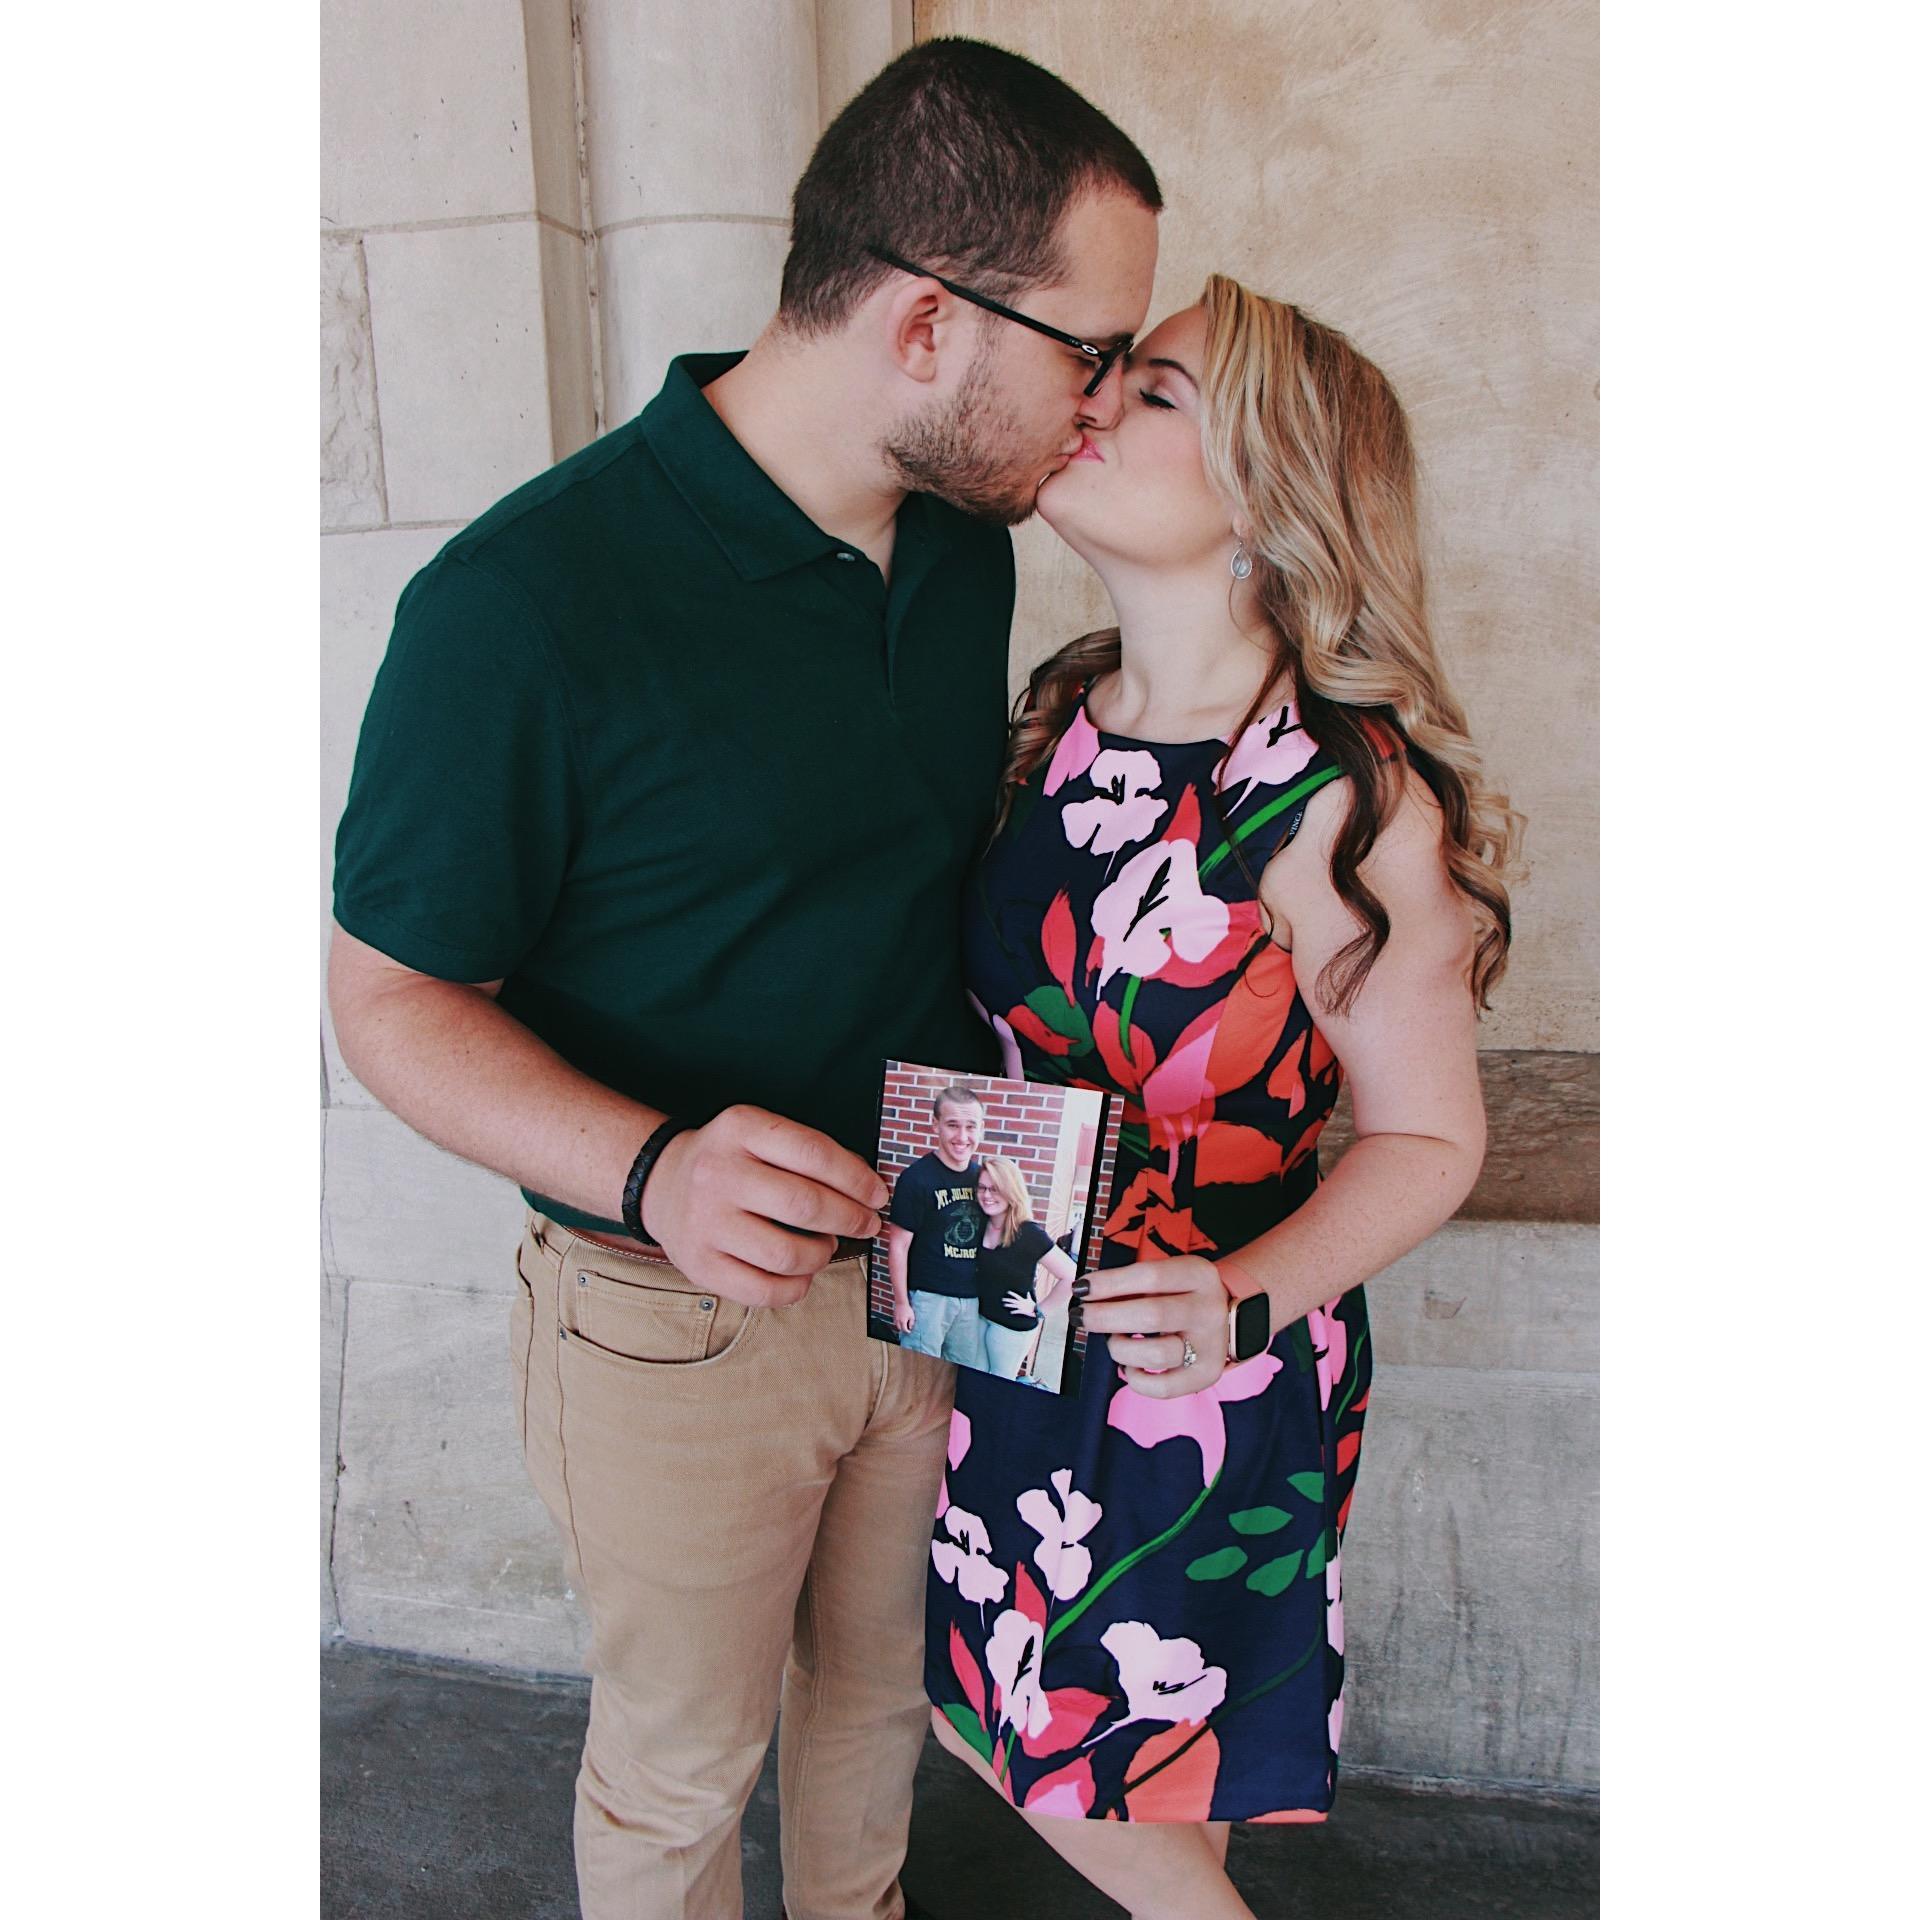 The photograph we are holding is the FIRST picture we ever took together back in September of 2013! We loved the idea of incorporating it into our engagement photos!